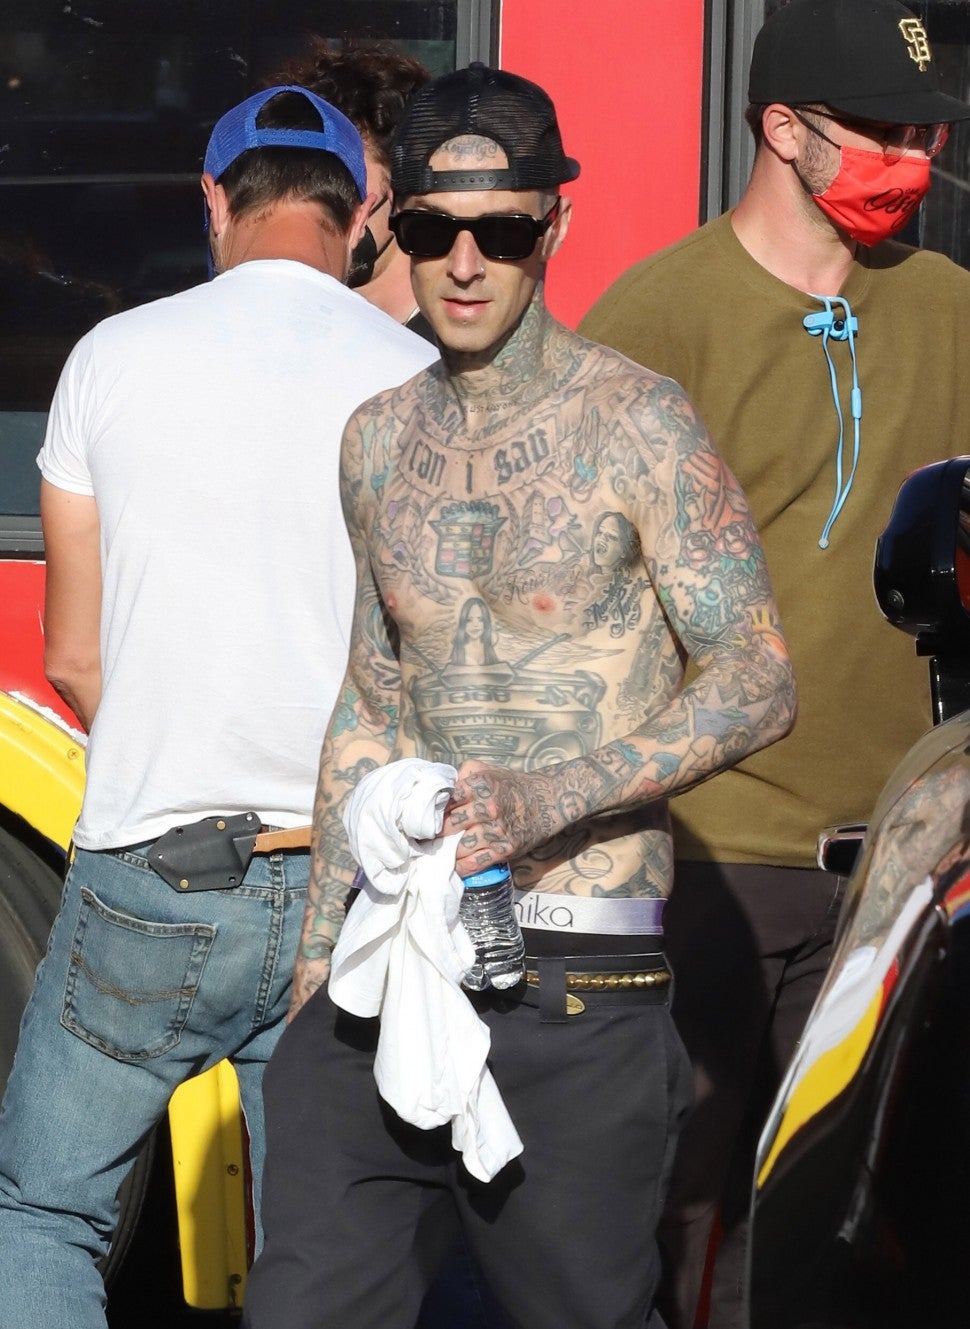 Travis Barker seen sporting a new Kourtney tattoo over his heart as he plays the drums for a video on top a Hollywood tour bus.